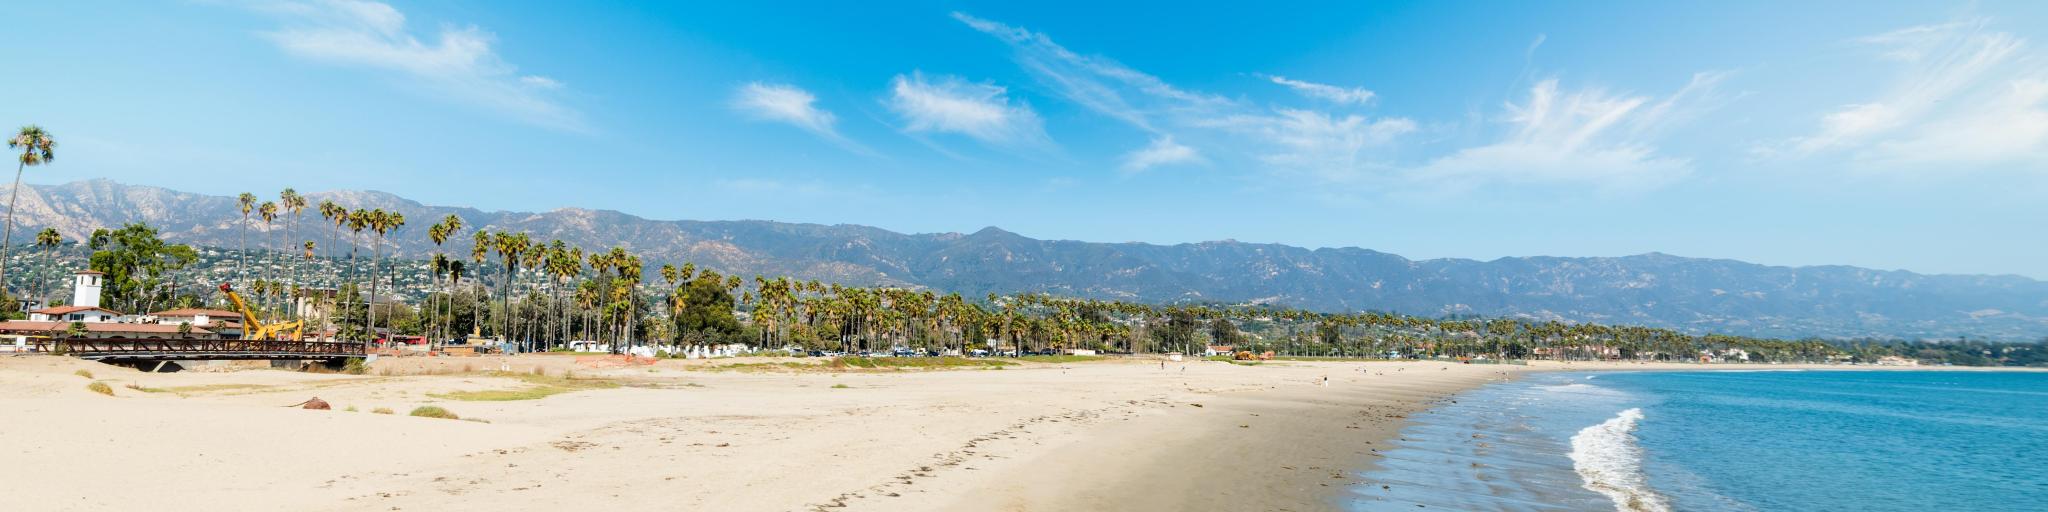 White sand in Santa Barbara shoreline, California with mountains in the background.